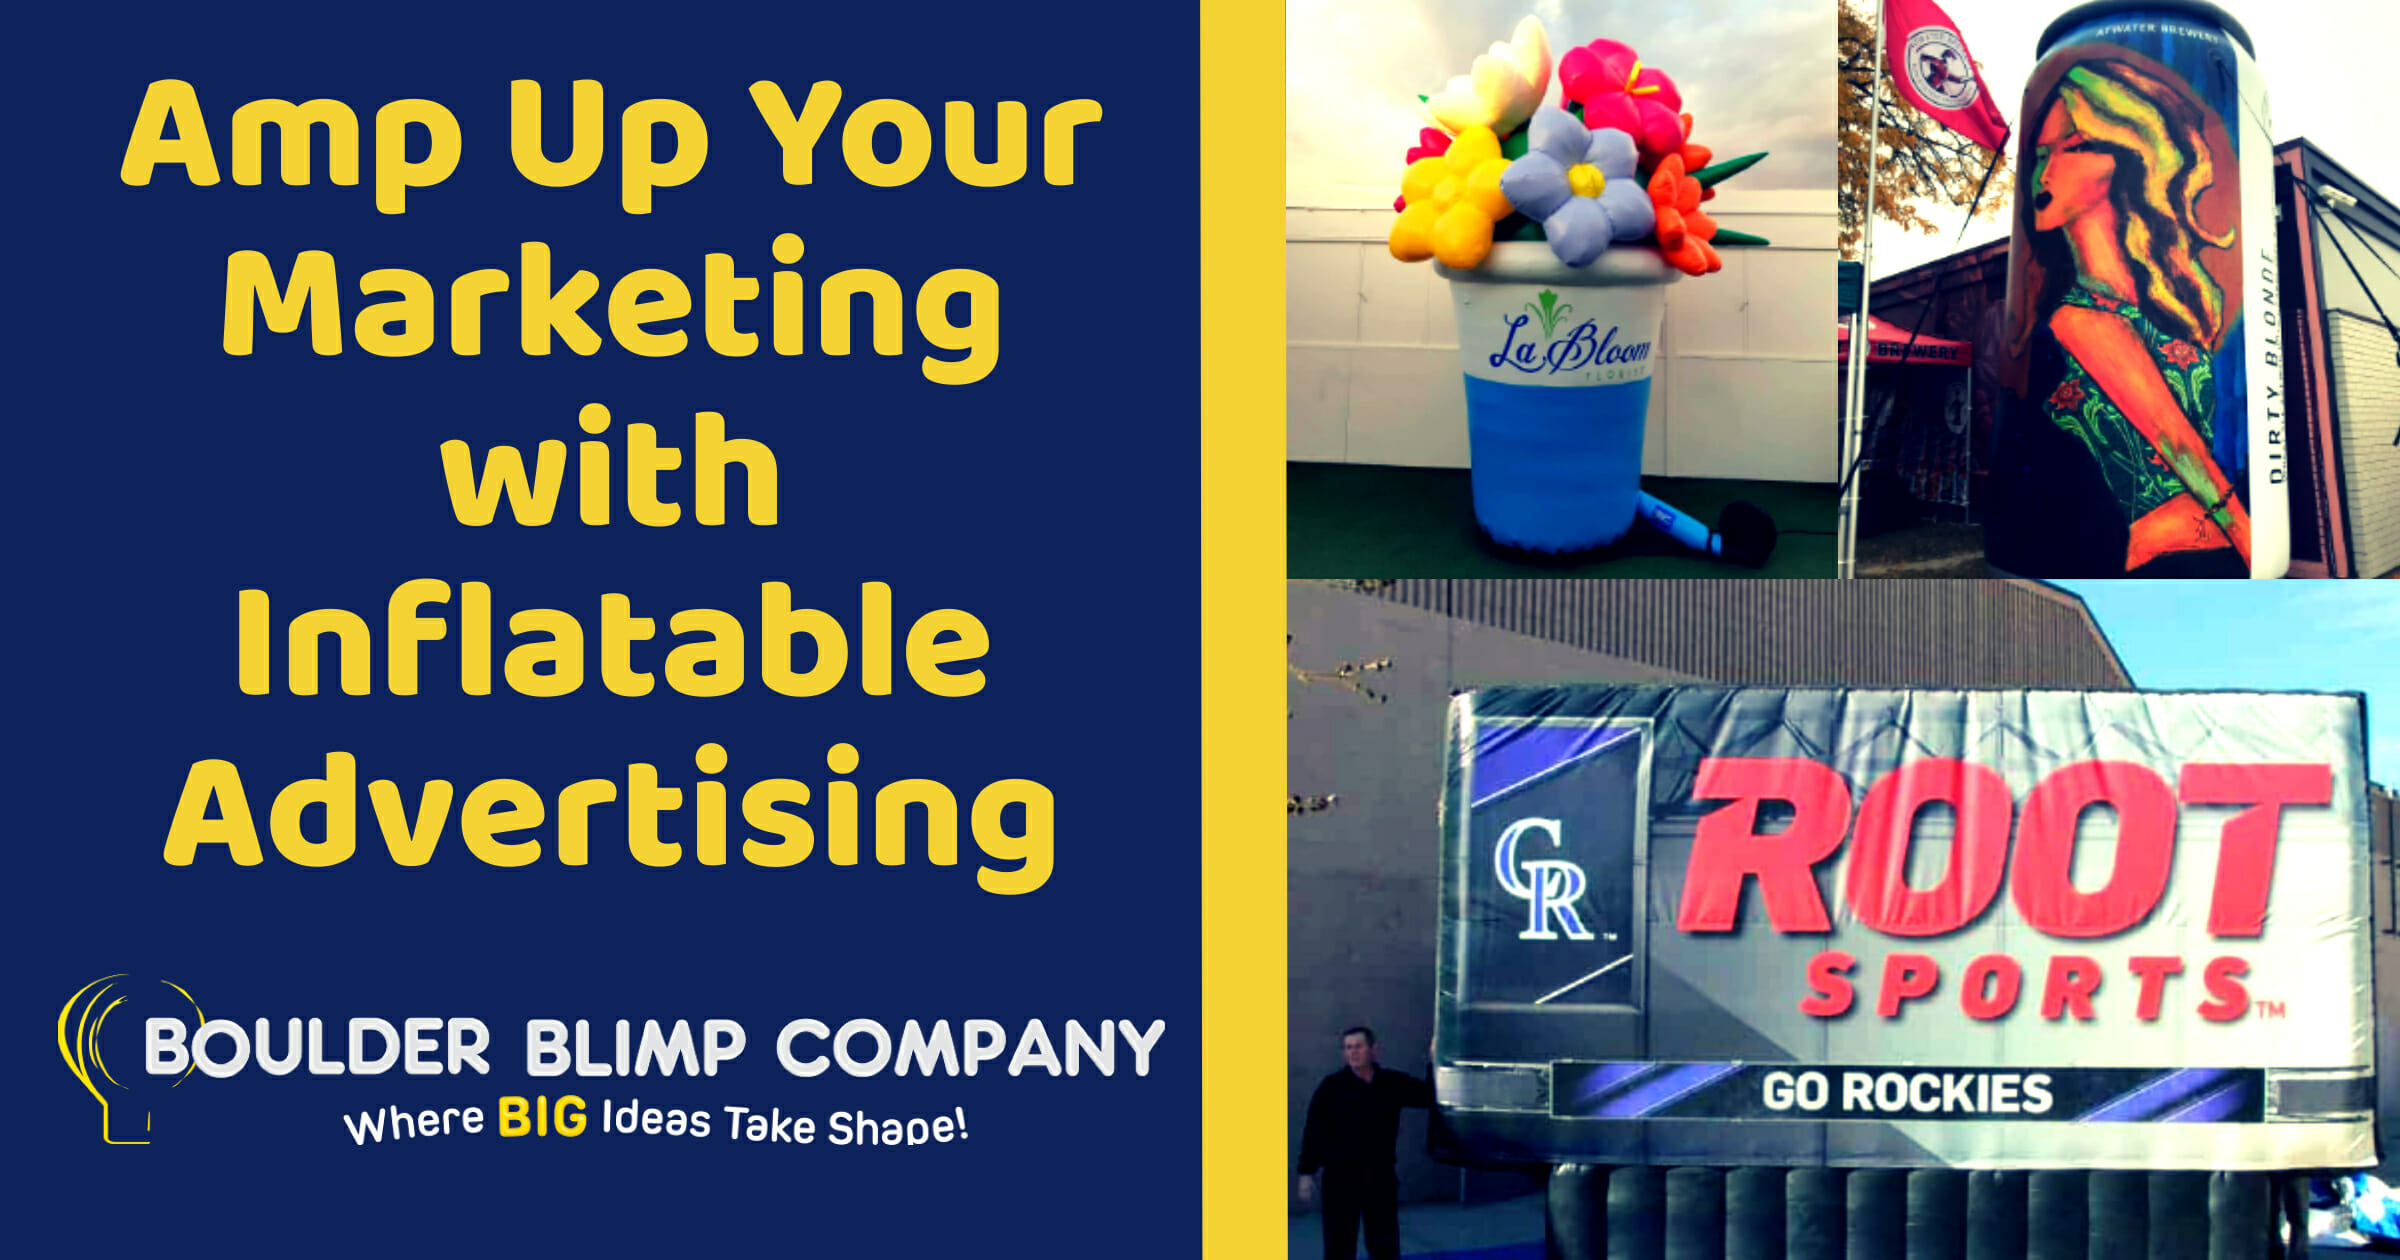 Amp Up Your Marketing with Inflatable Advertising